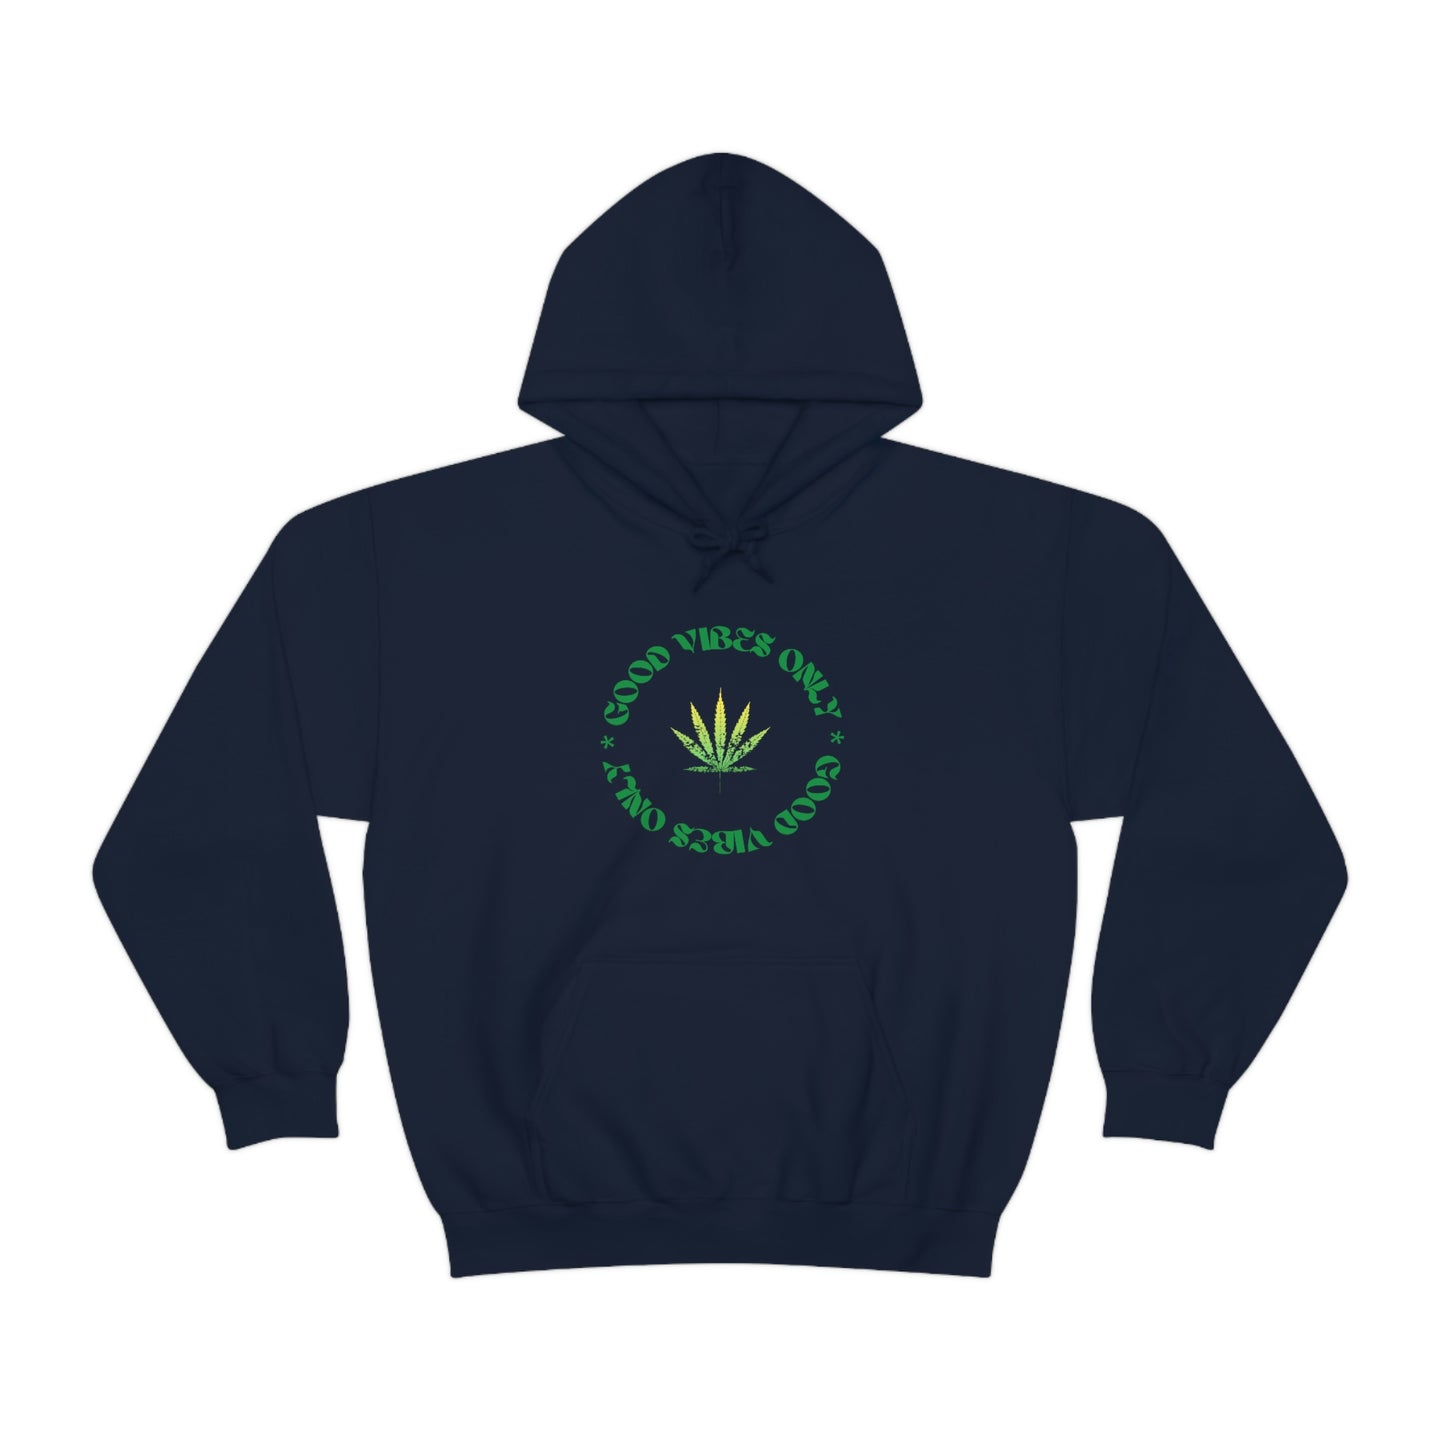 A navy hoodie with the Good Vibes Only Weed Sweater on it.